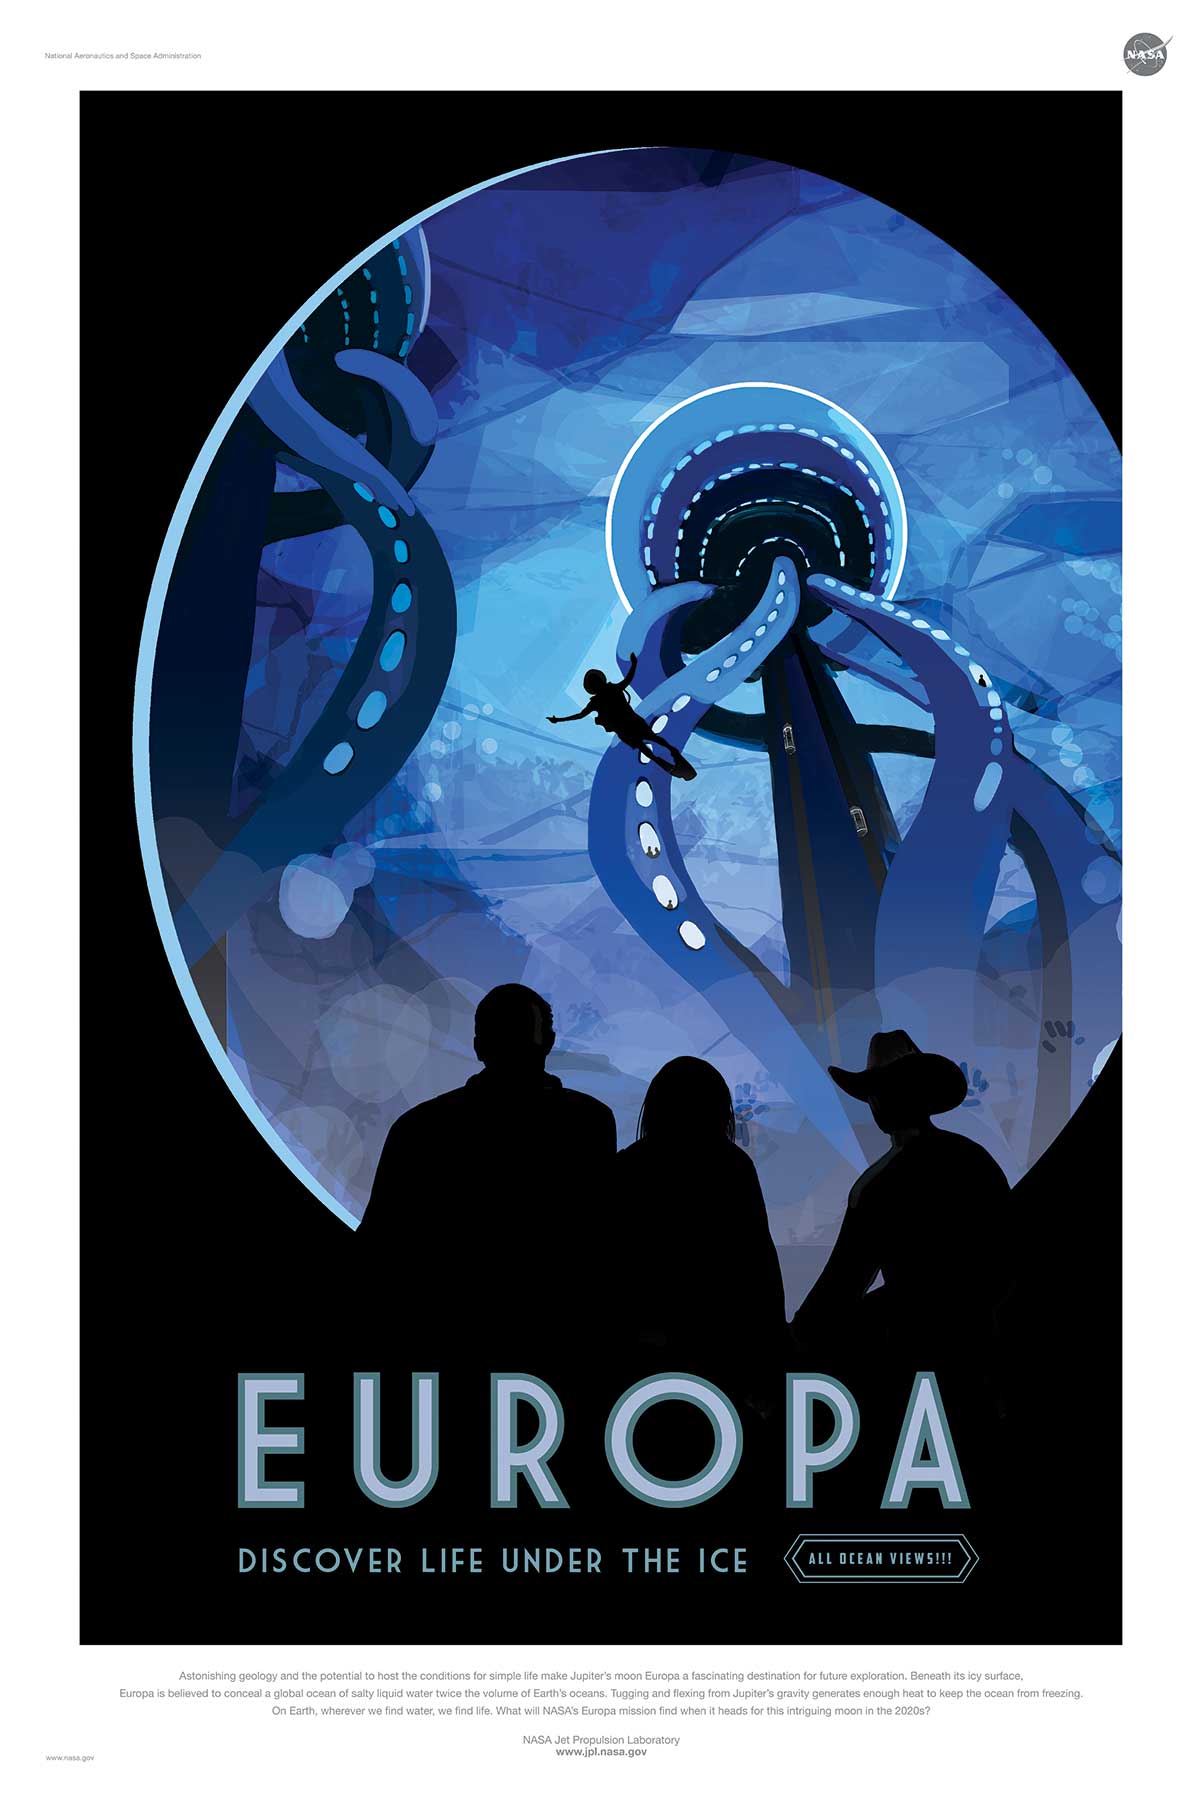 NASA poster promoting space travel to Europa